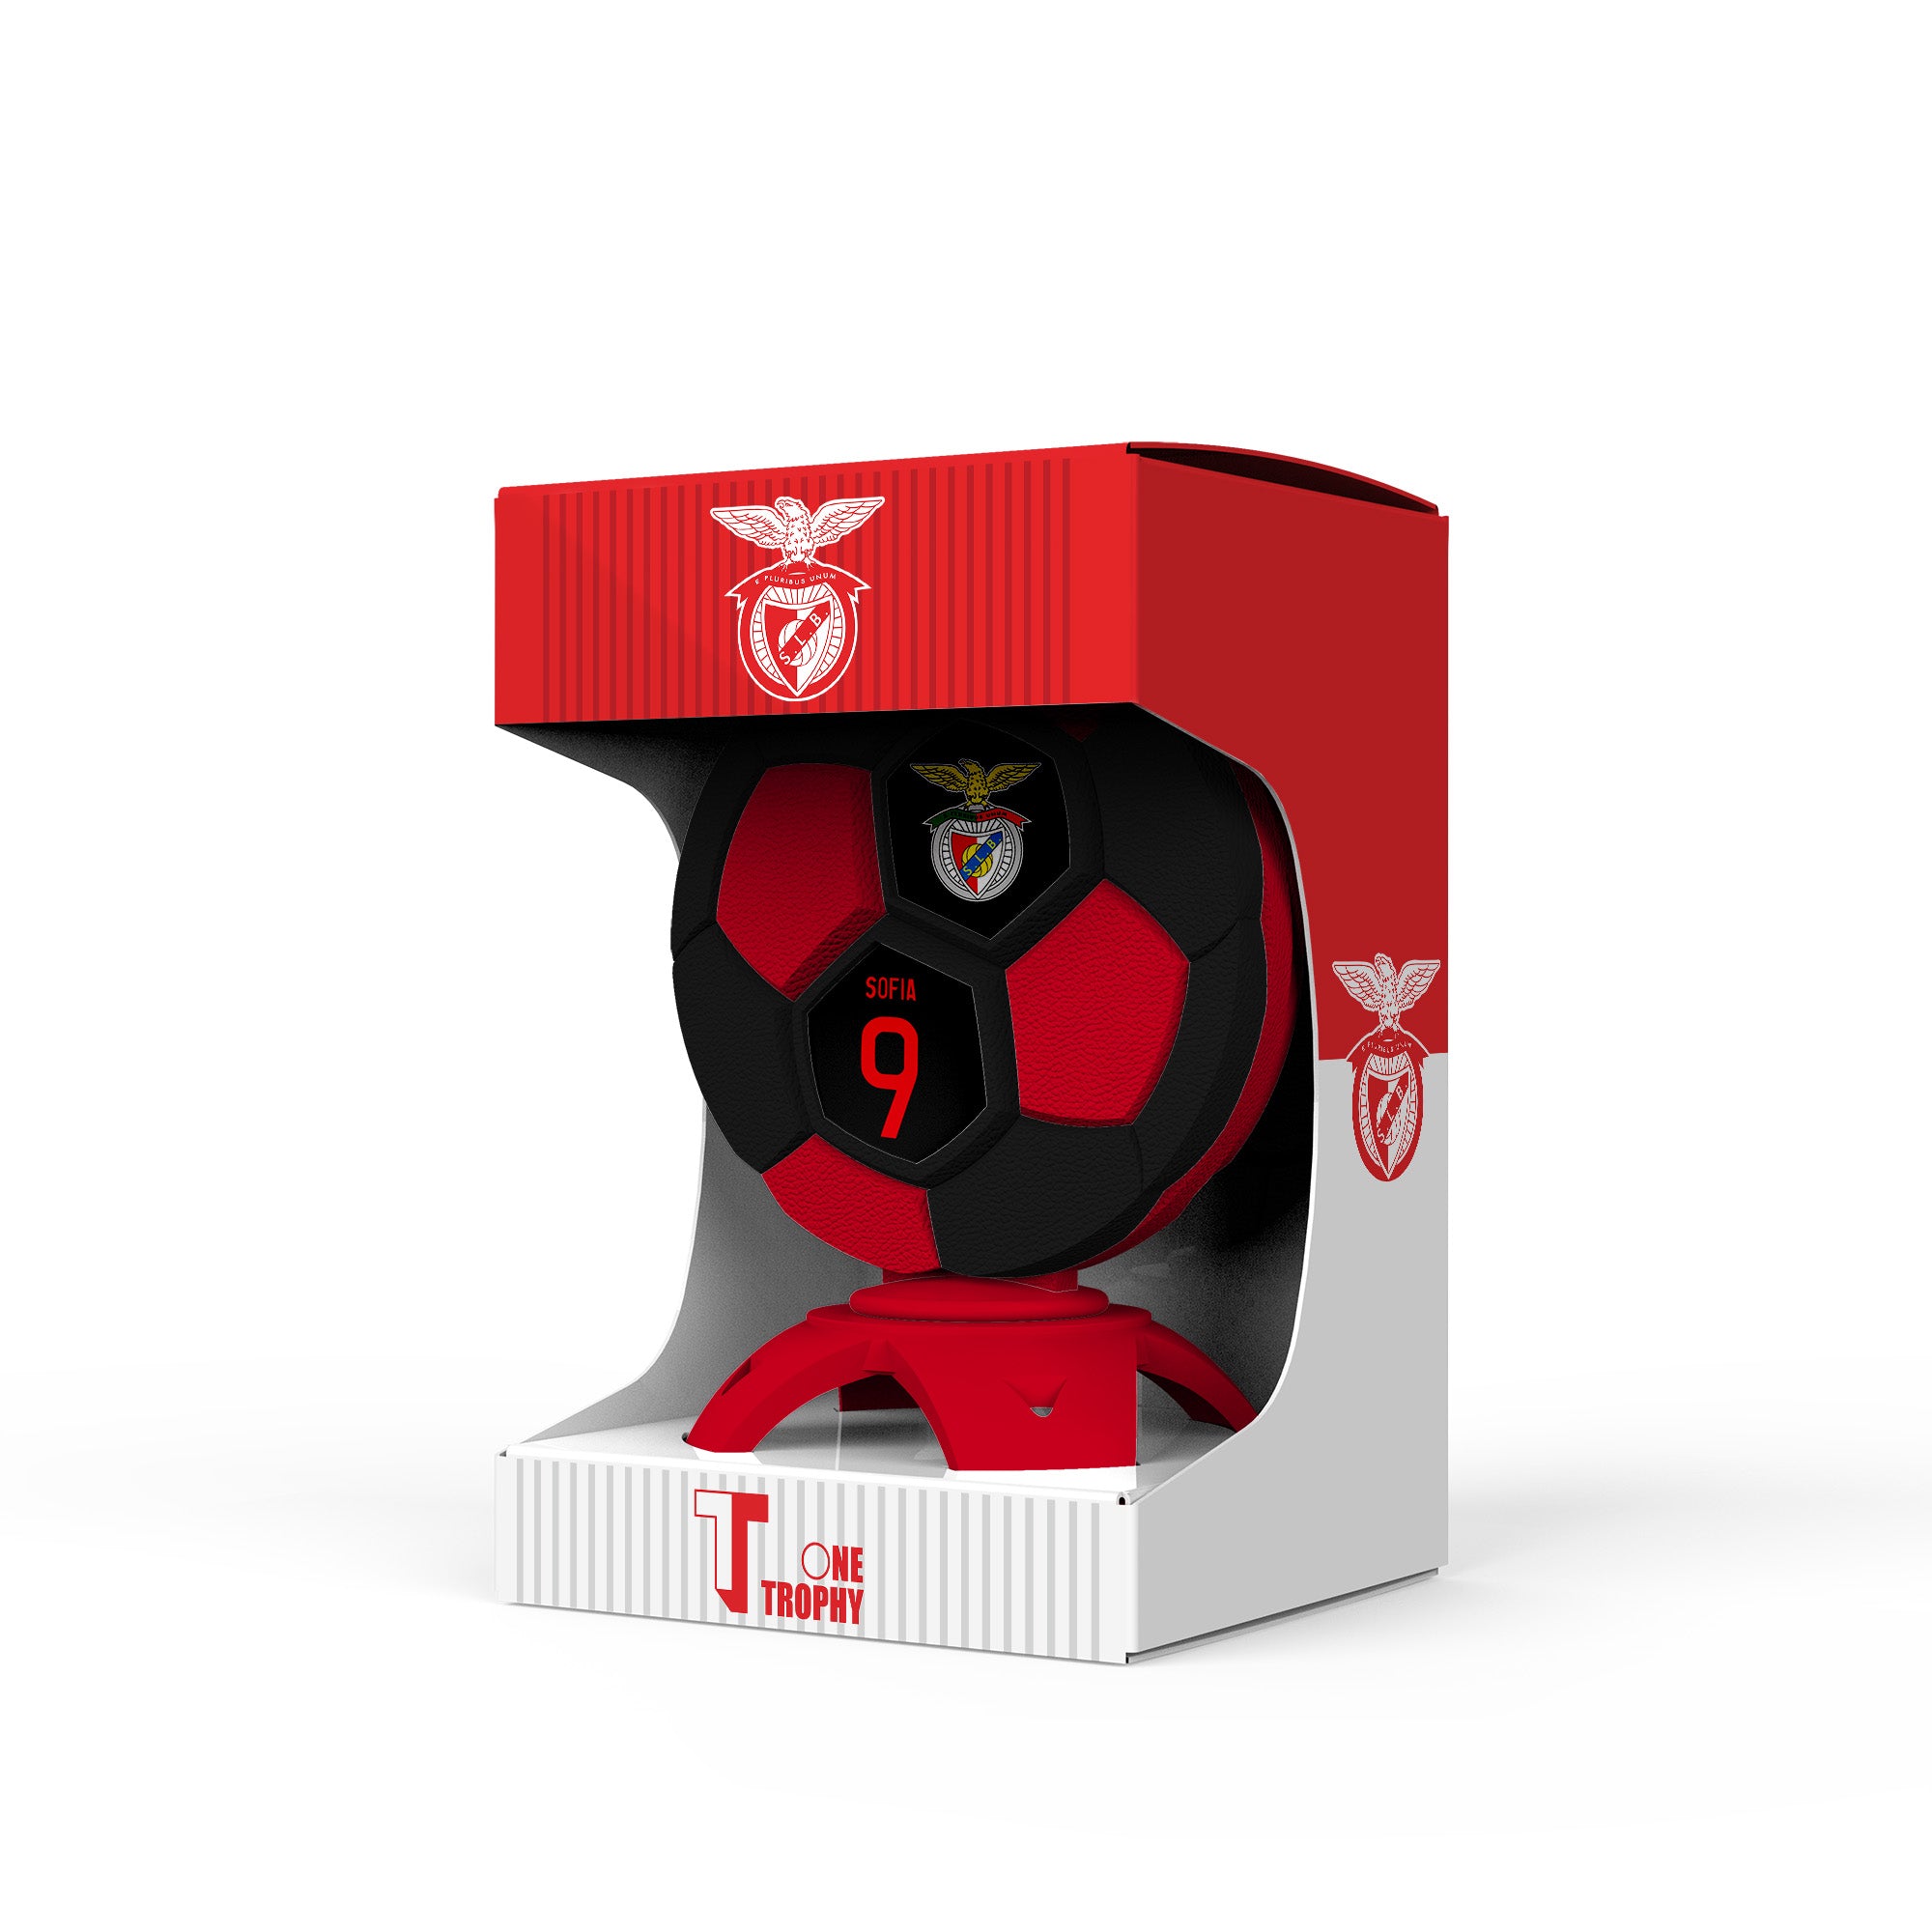 Create your officially licensed Benfica Lisbon trophy 